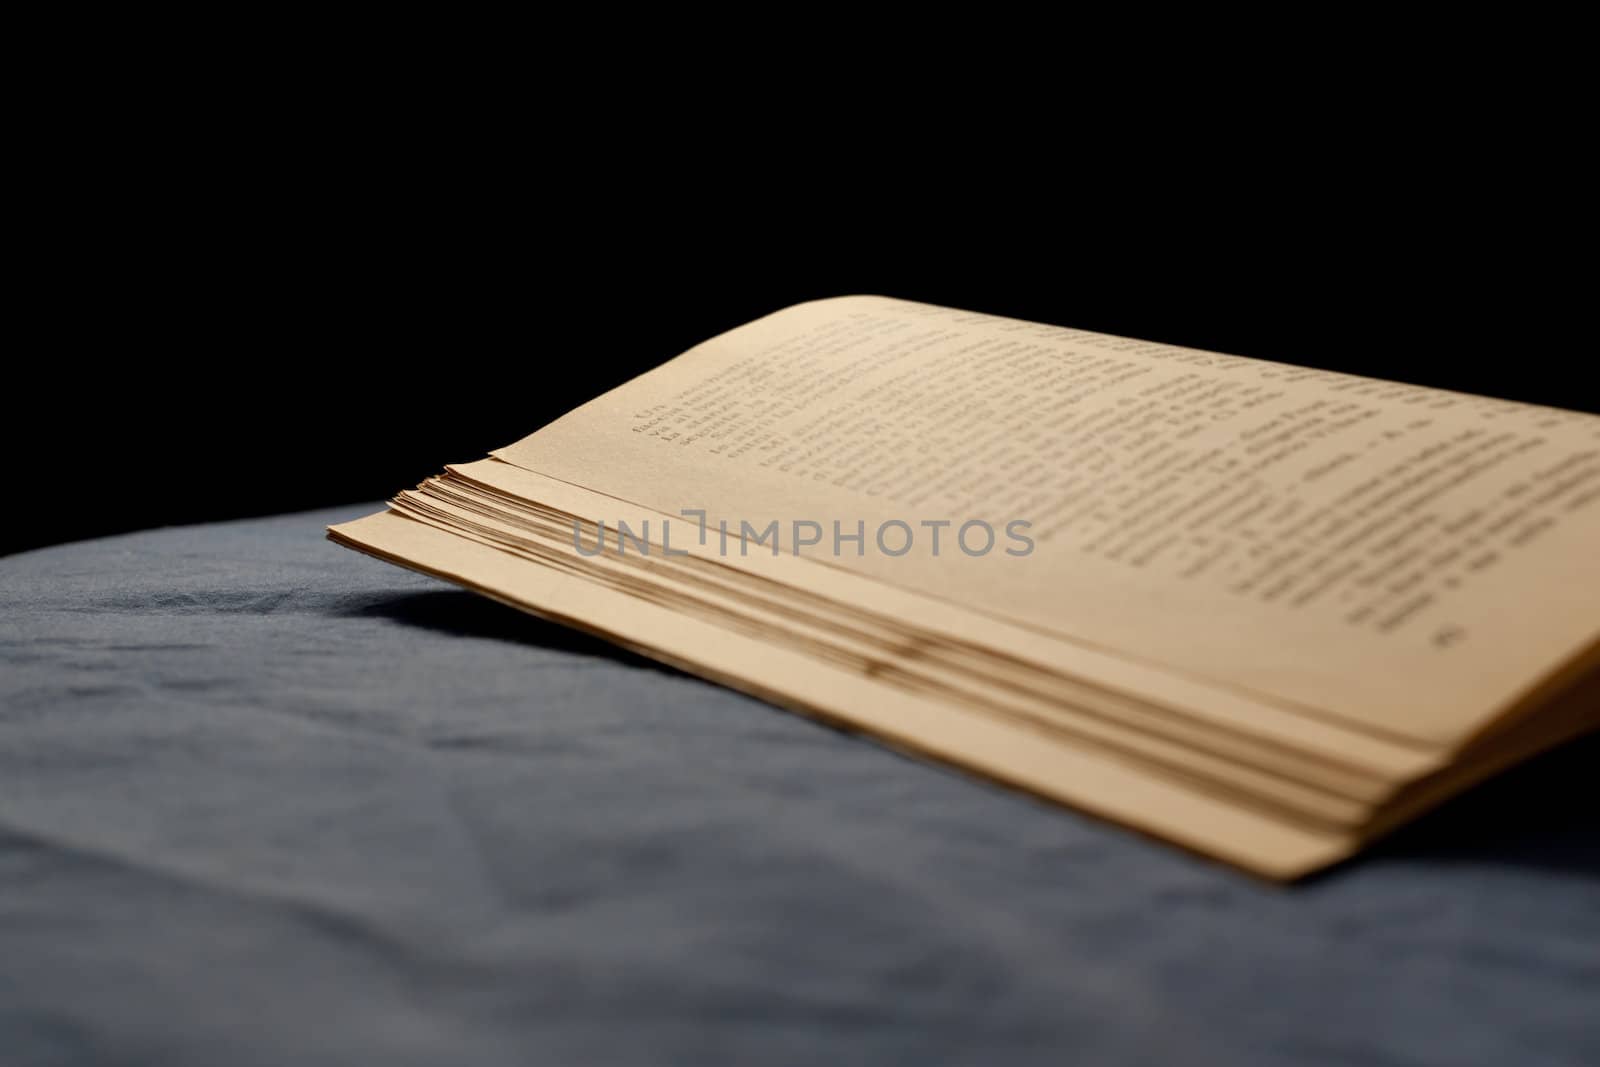 An old book on a bed with dark sheet